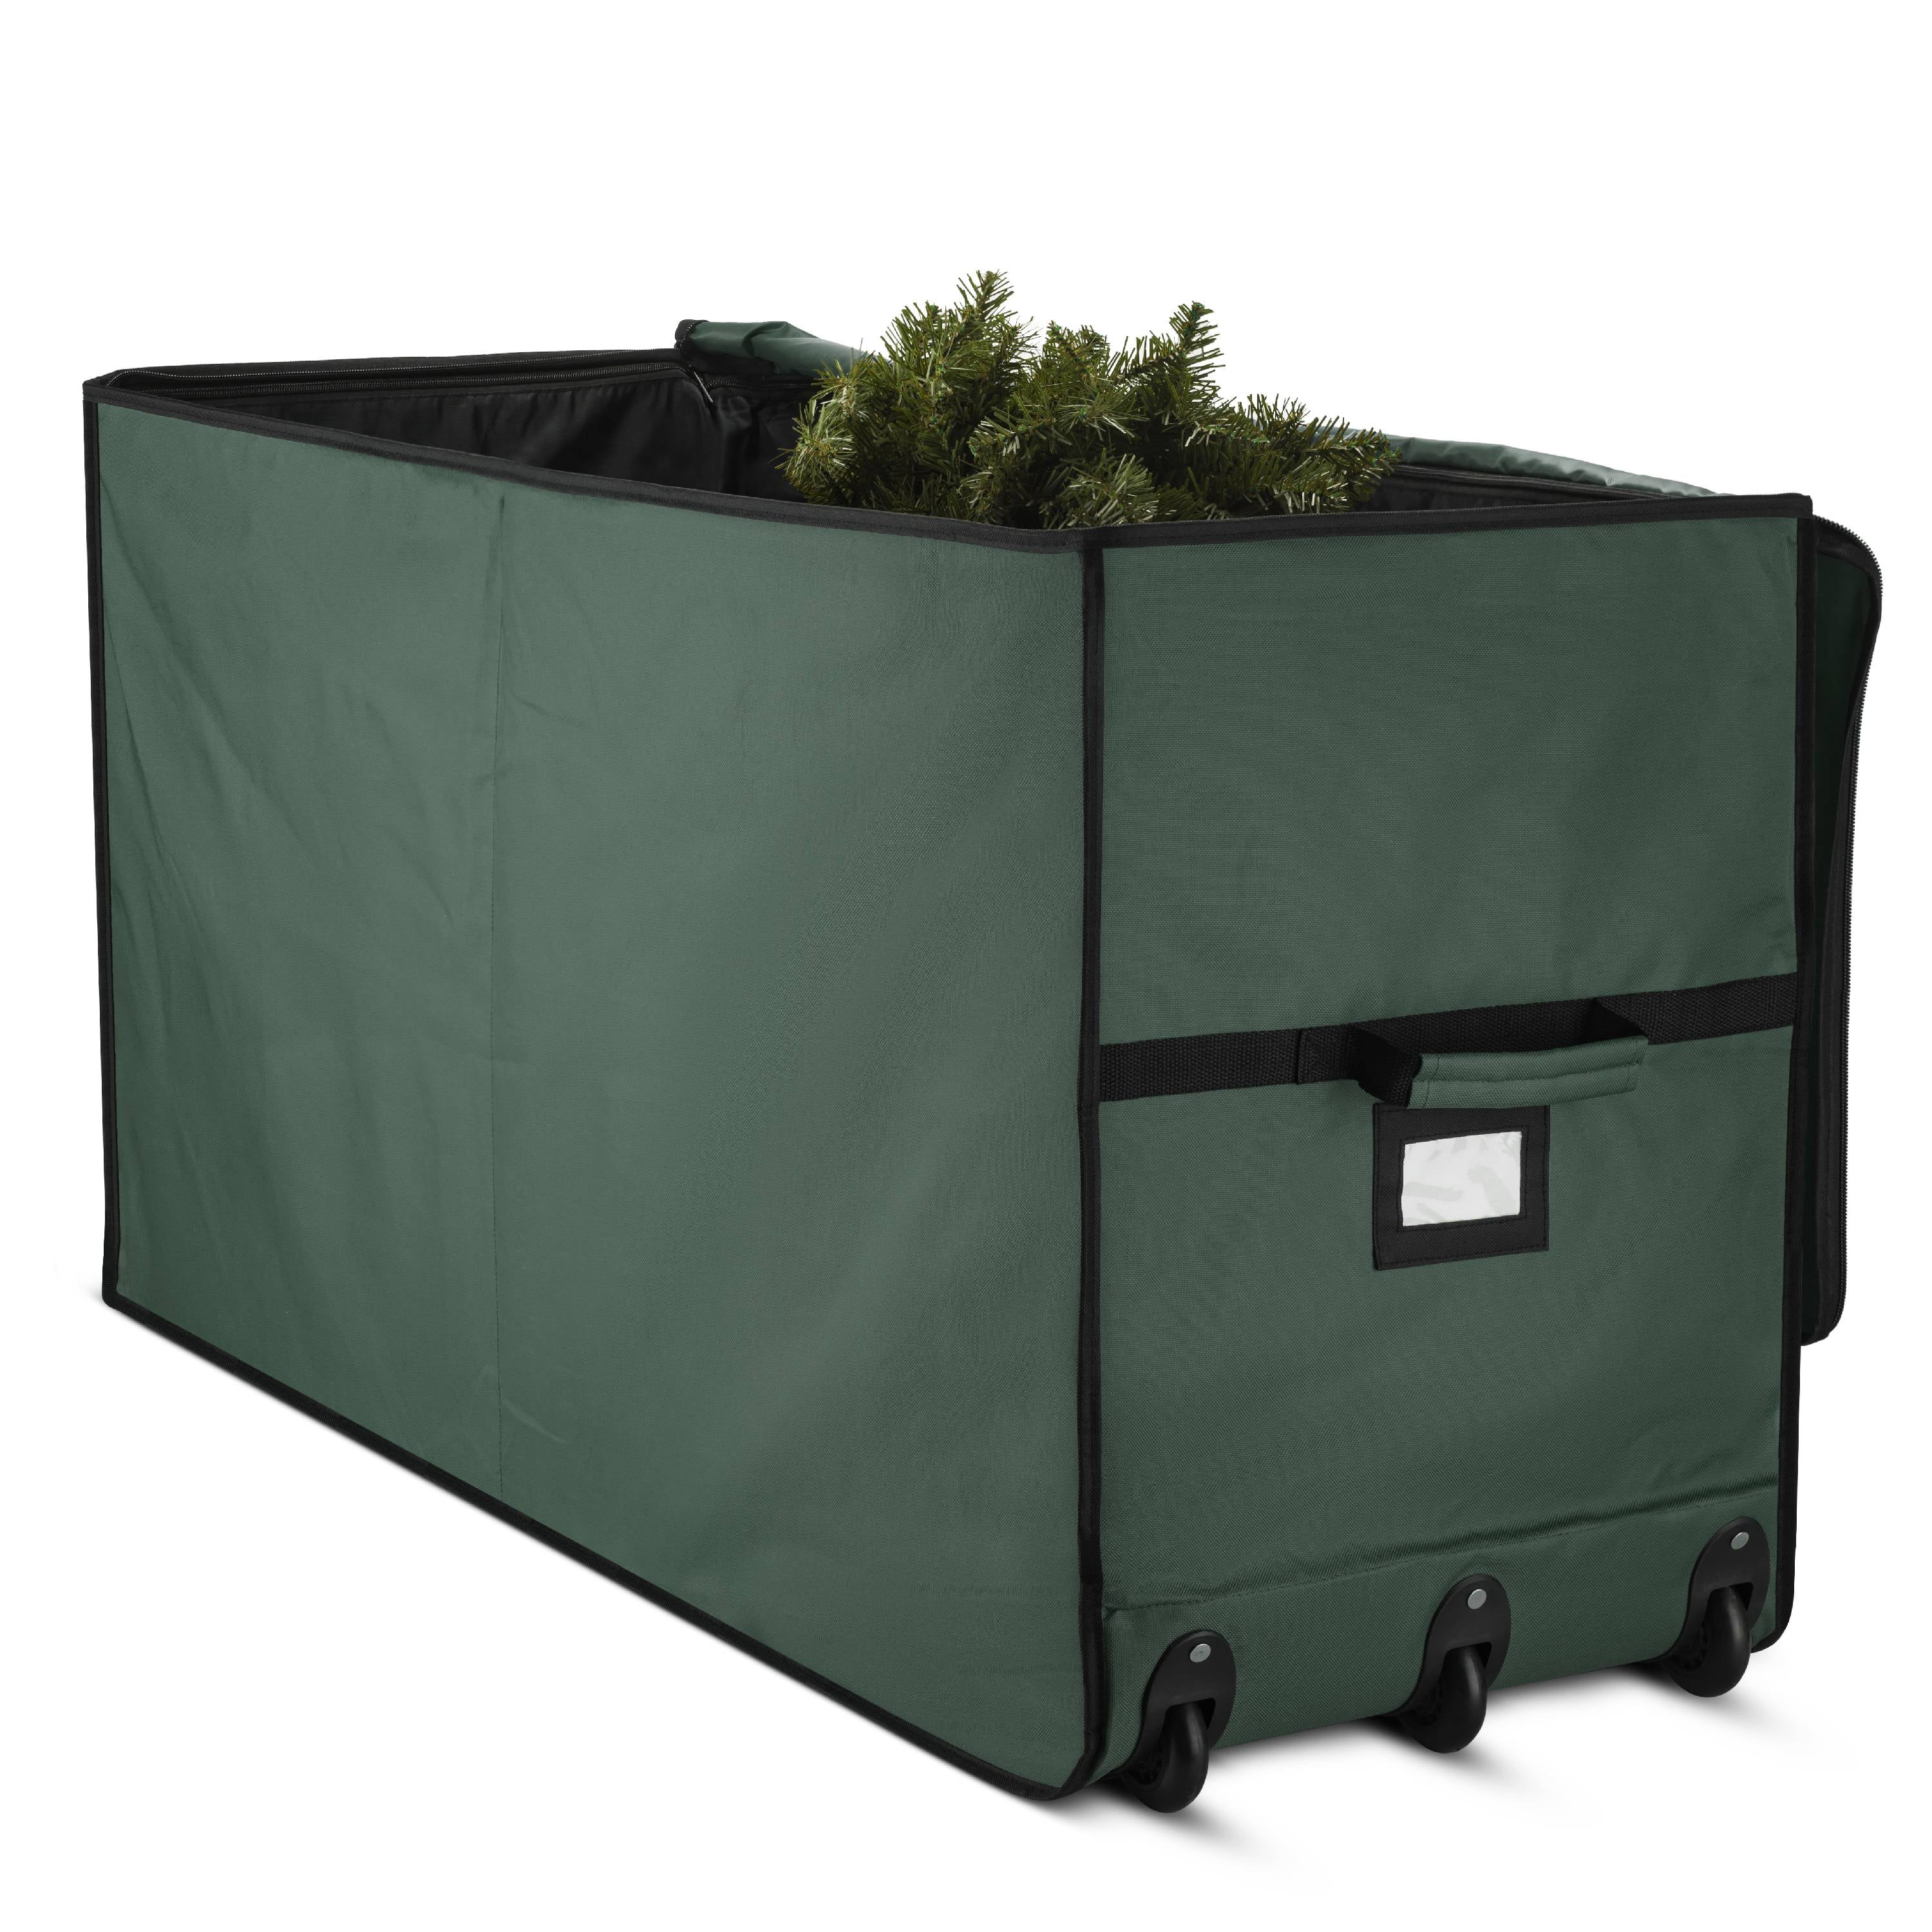 Super Rolling Christmas Tree Storage Box - Opens Wide for Easy Input/Access, Artificial Trees ...